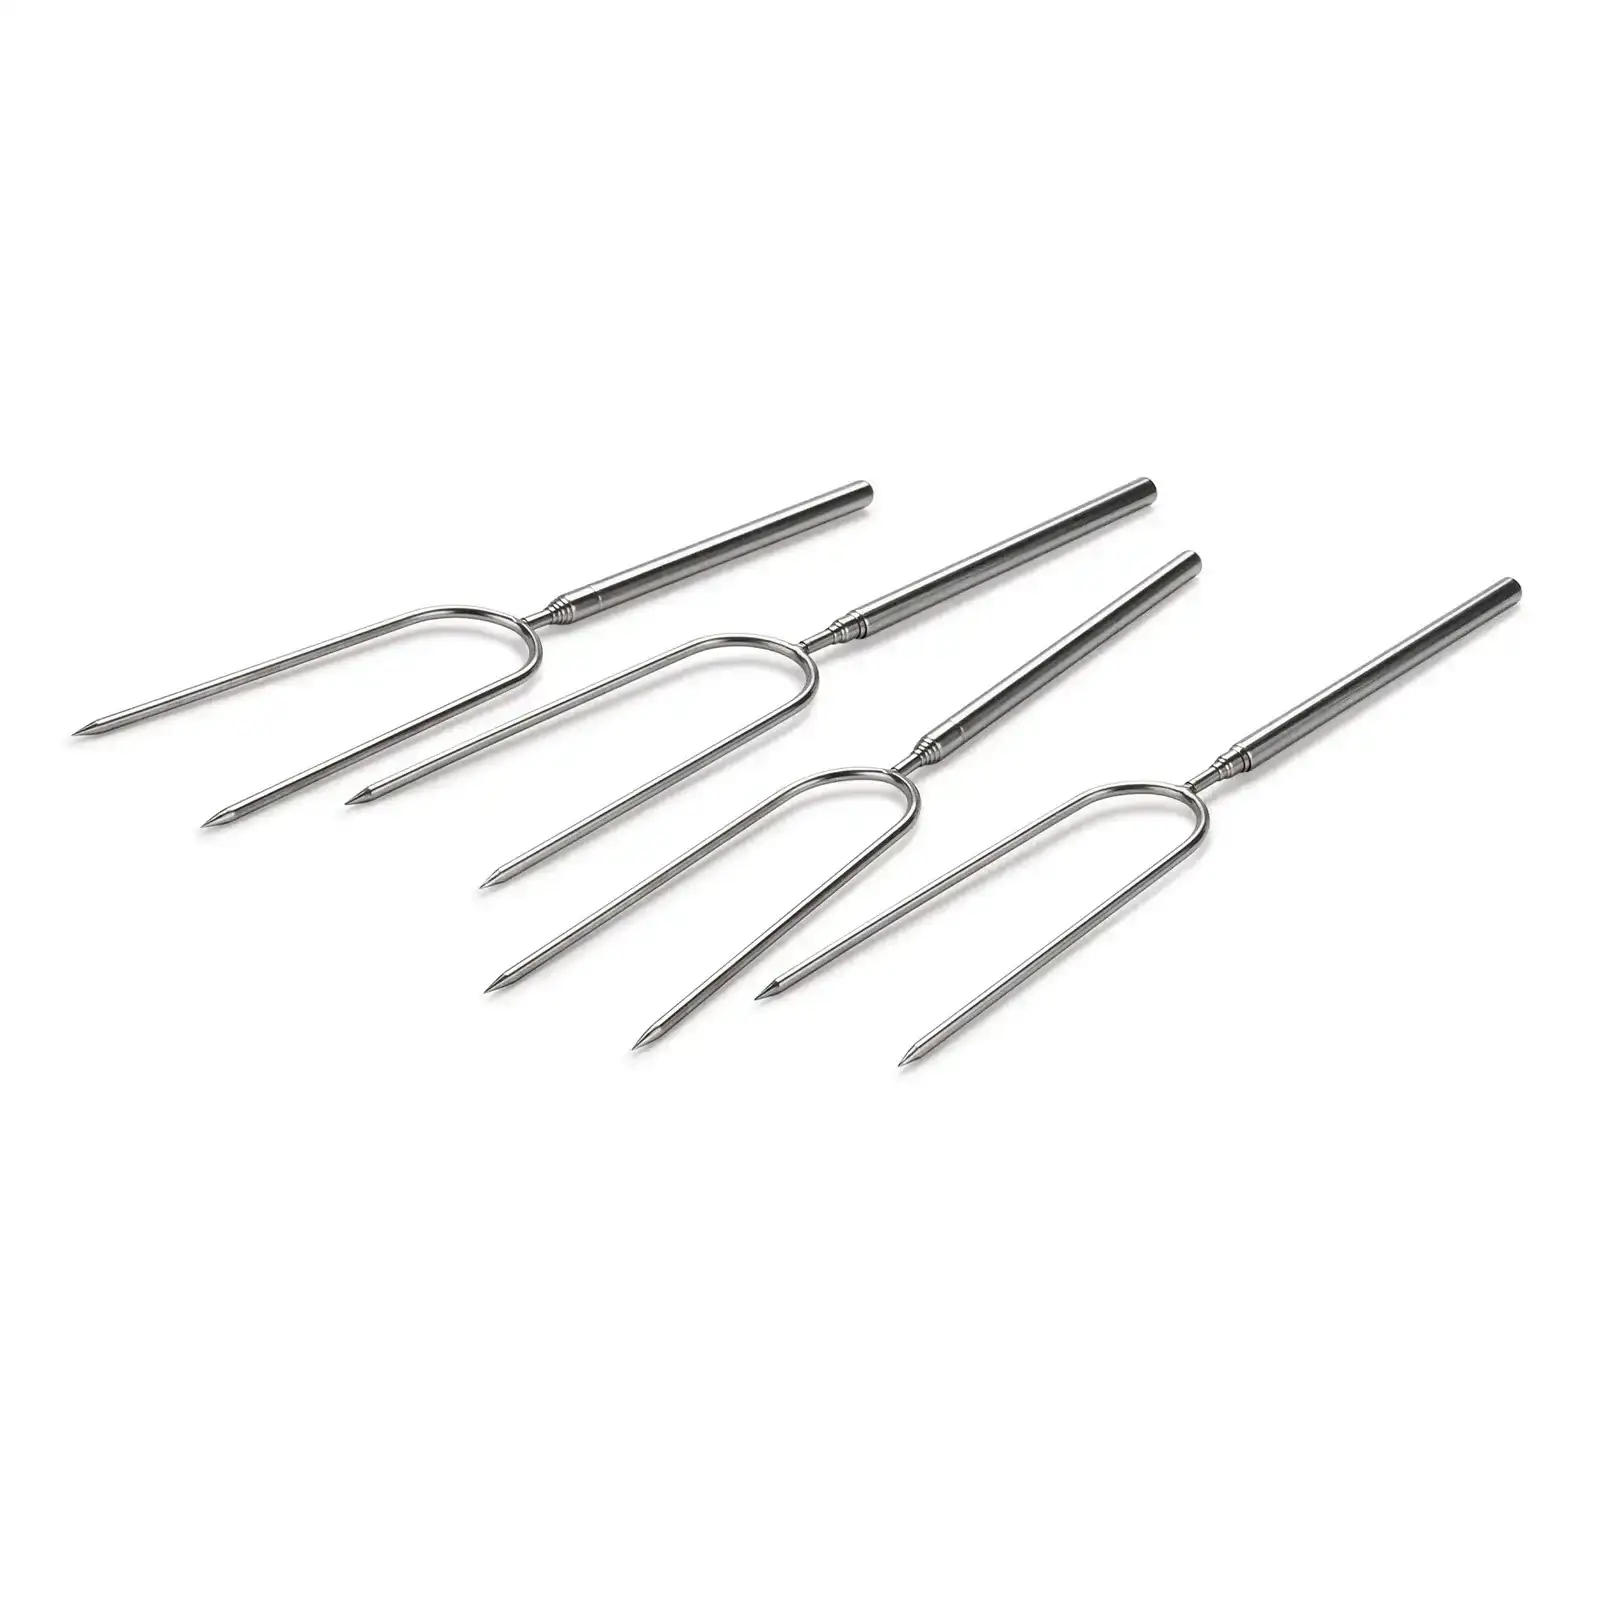 Save 50% - WoodRiver® Campfire Roasting Fork Turning Kit - Stainless Steel - 4 Piece